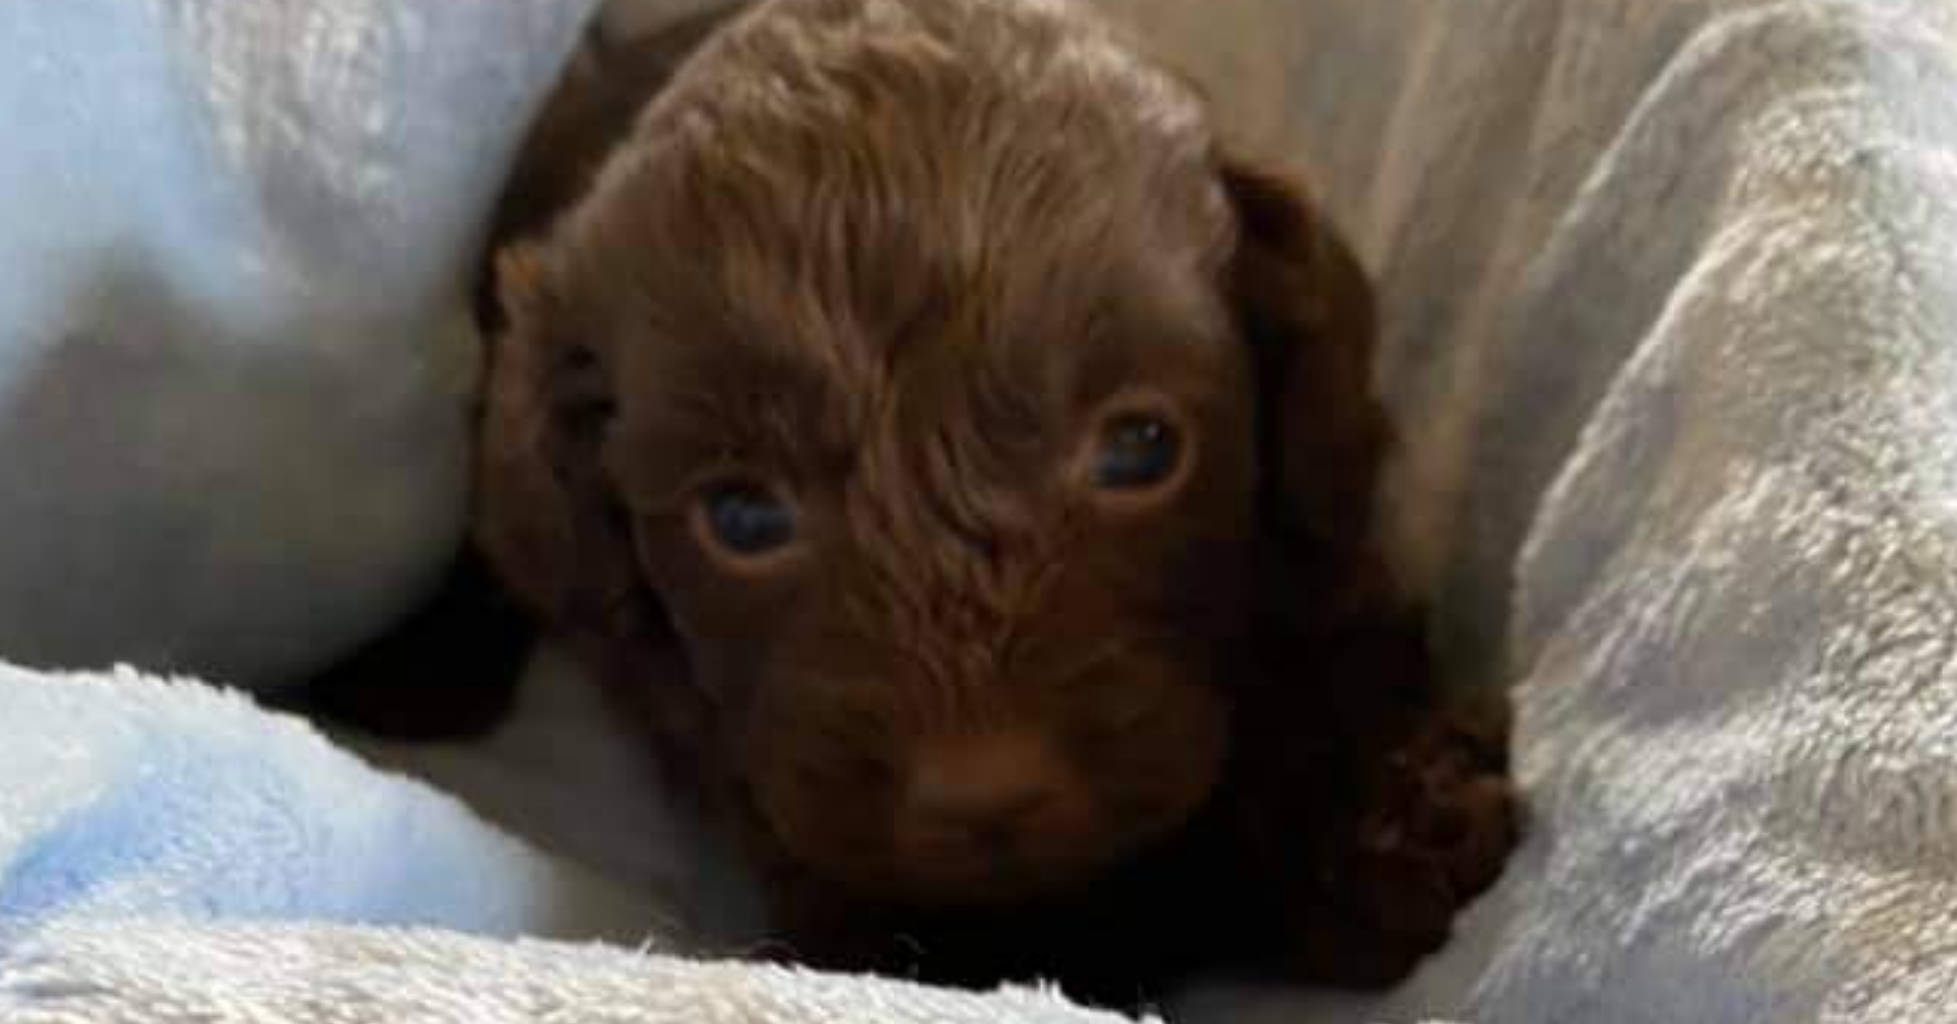 Read more about the article MISSING CHOCOLATE MALE CAVOODLE PUPPY.